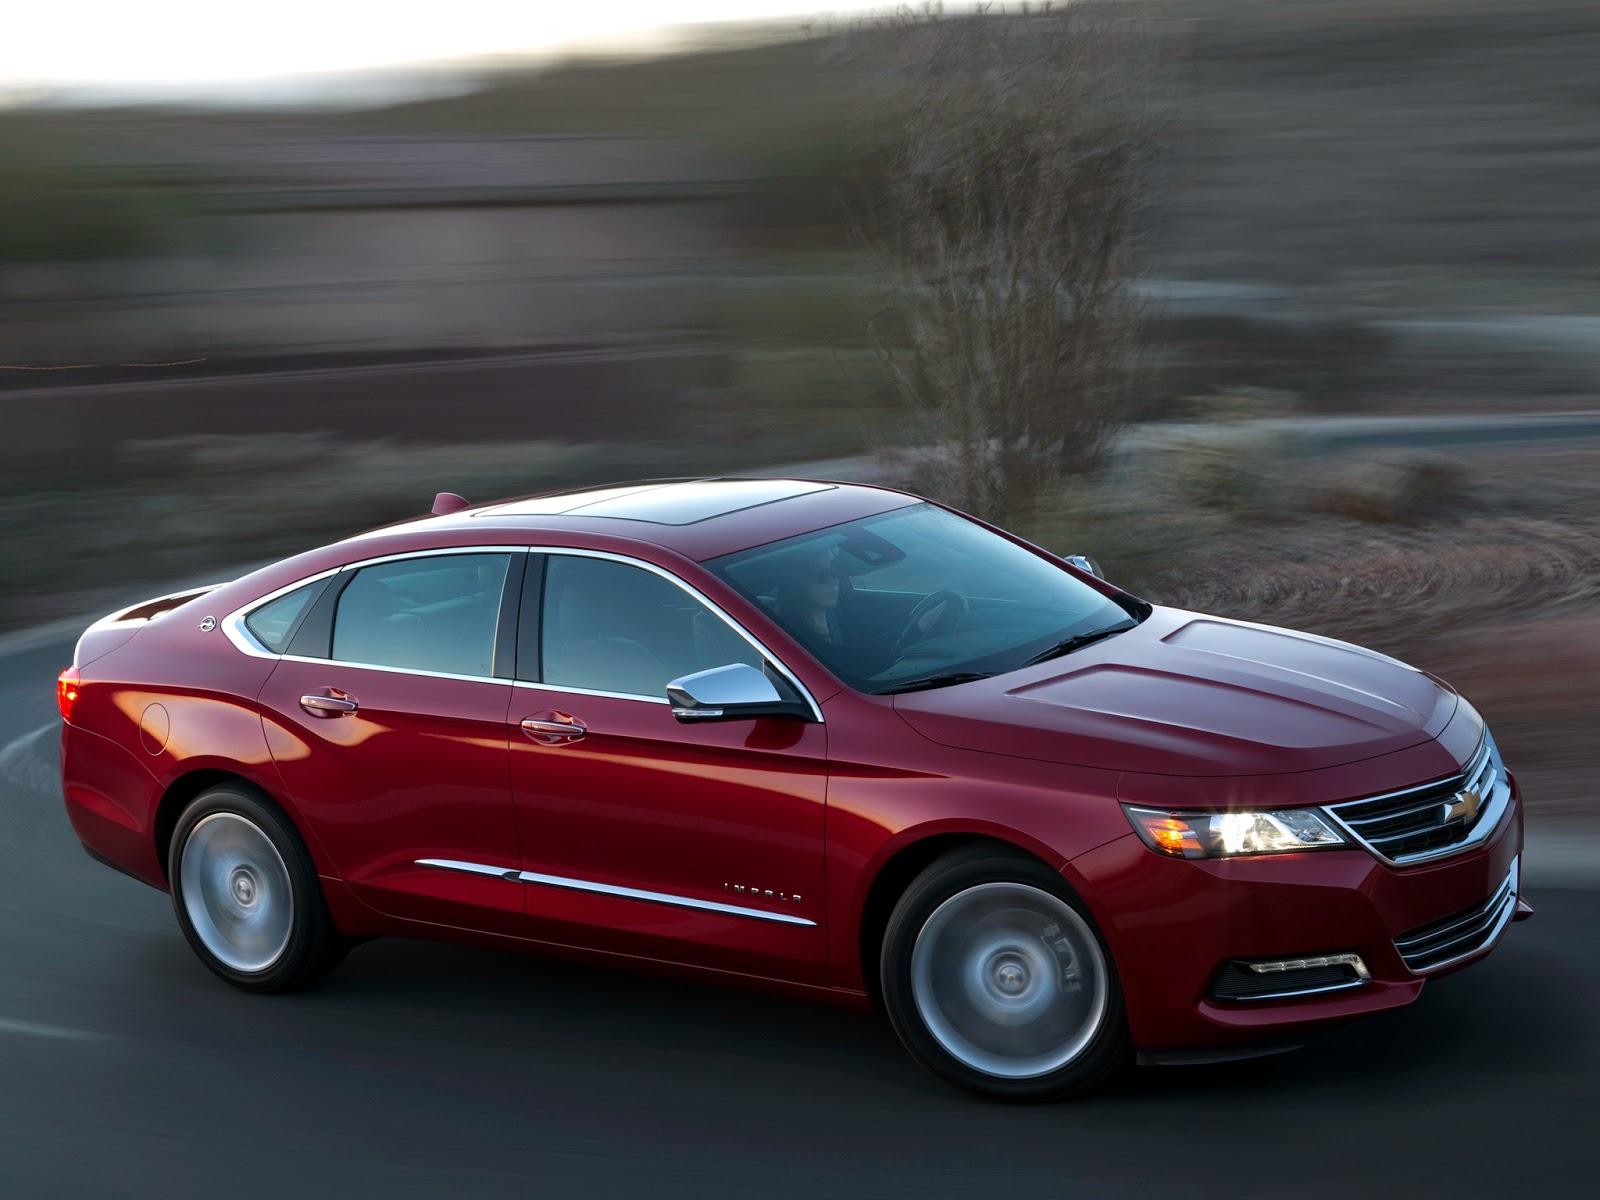 2015 Chevy Impala SS Redesign,Engine & Release Date